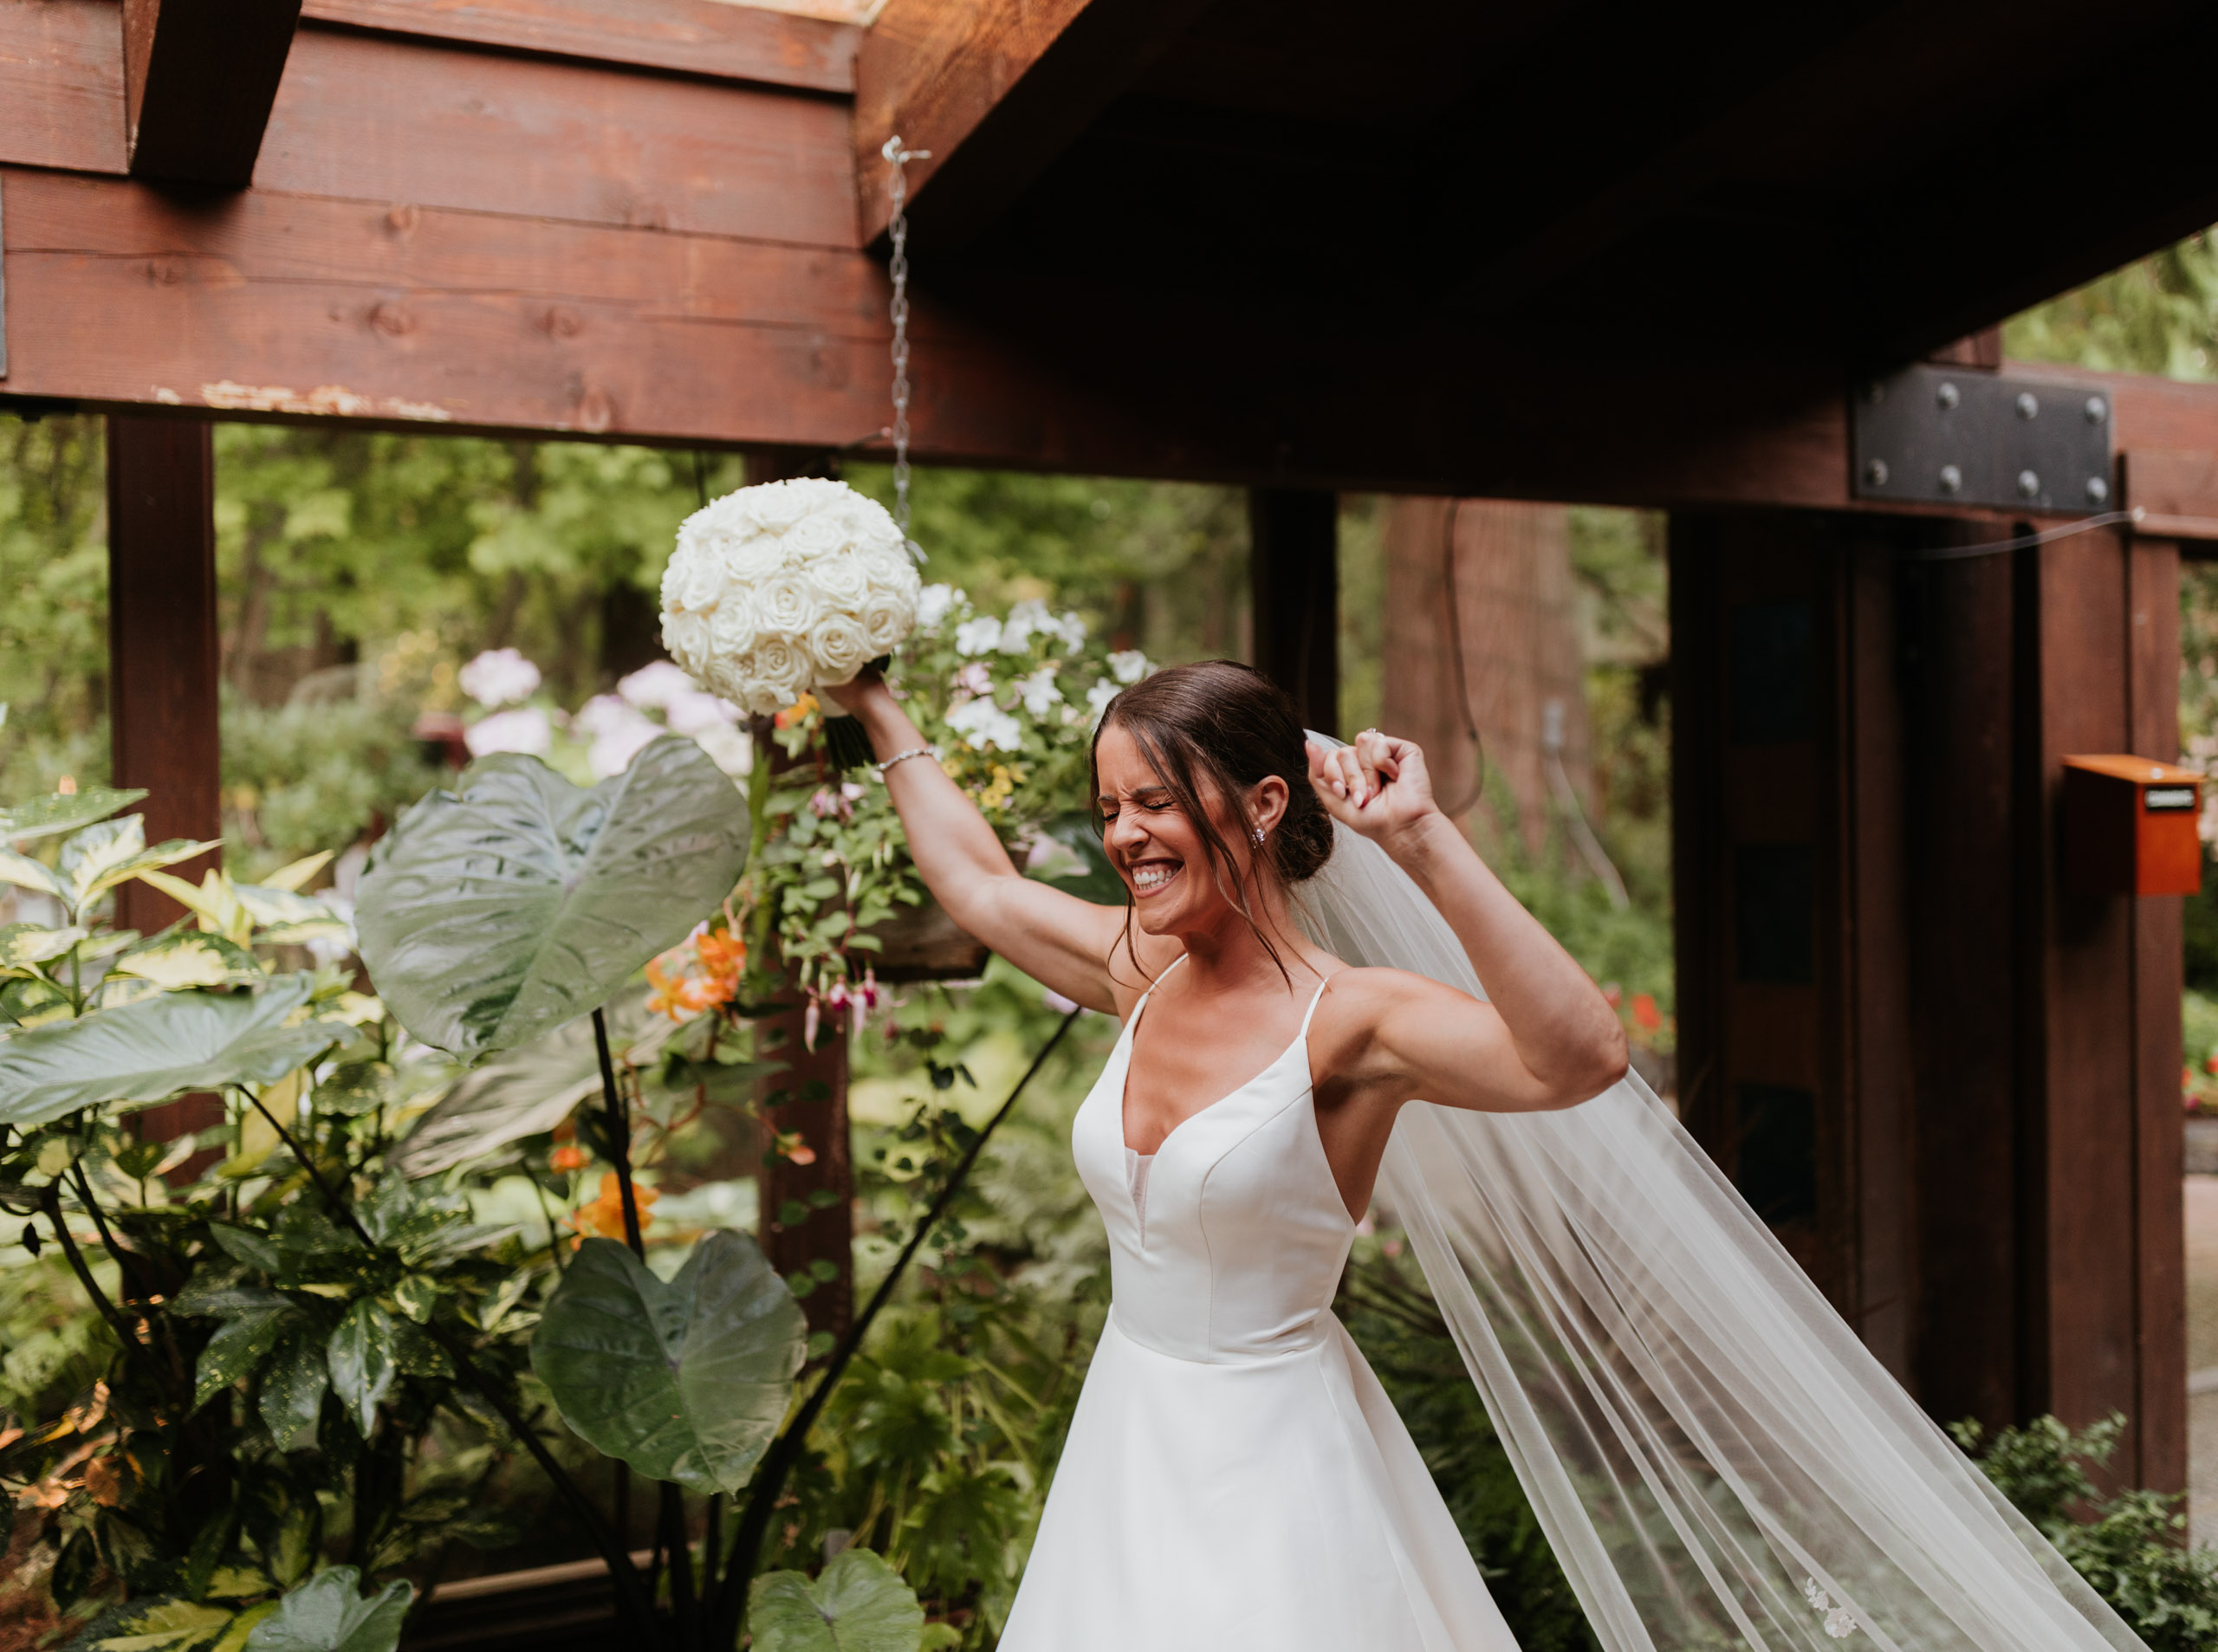 https://breannapluskevin.com/wp-content/uploads/photo-gallery/imported_from_media_libray/kiana-lodge-wedding-bm-breanna-plus-kevin-41.jpg